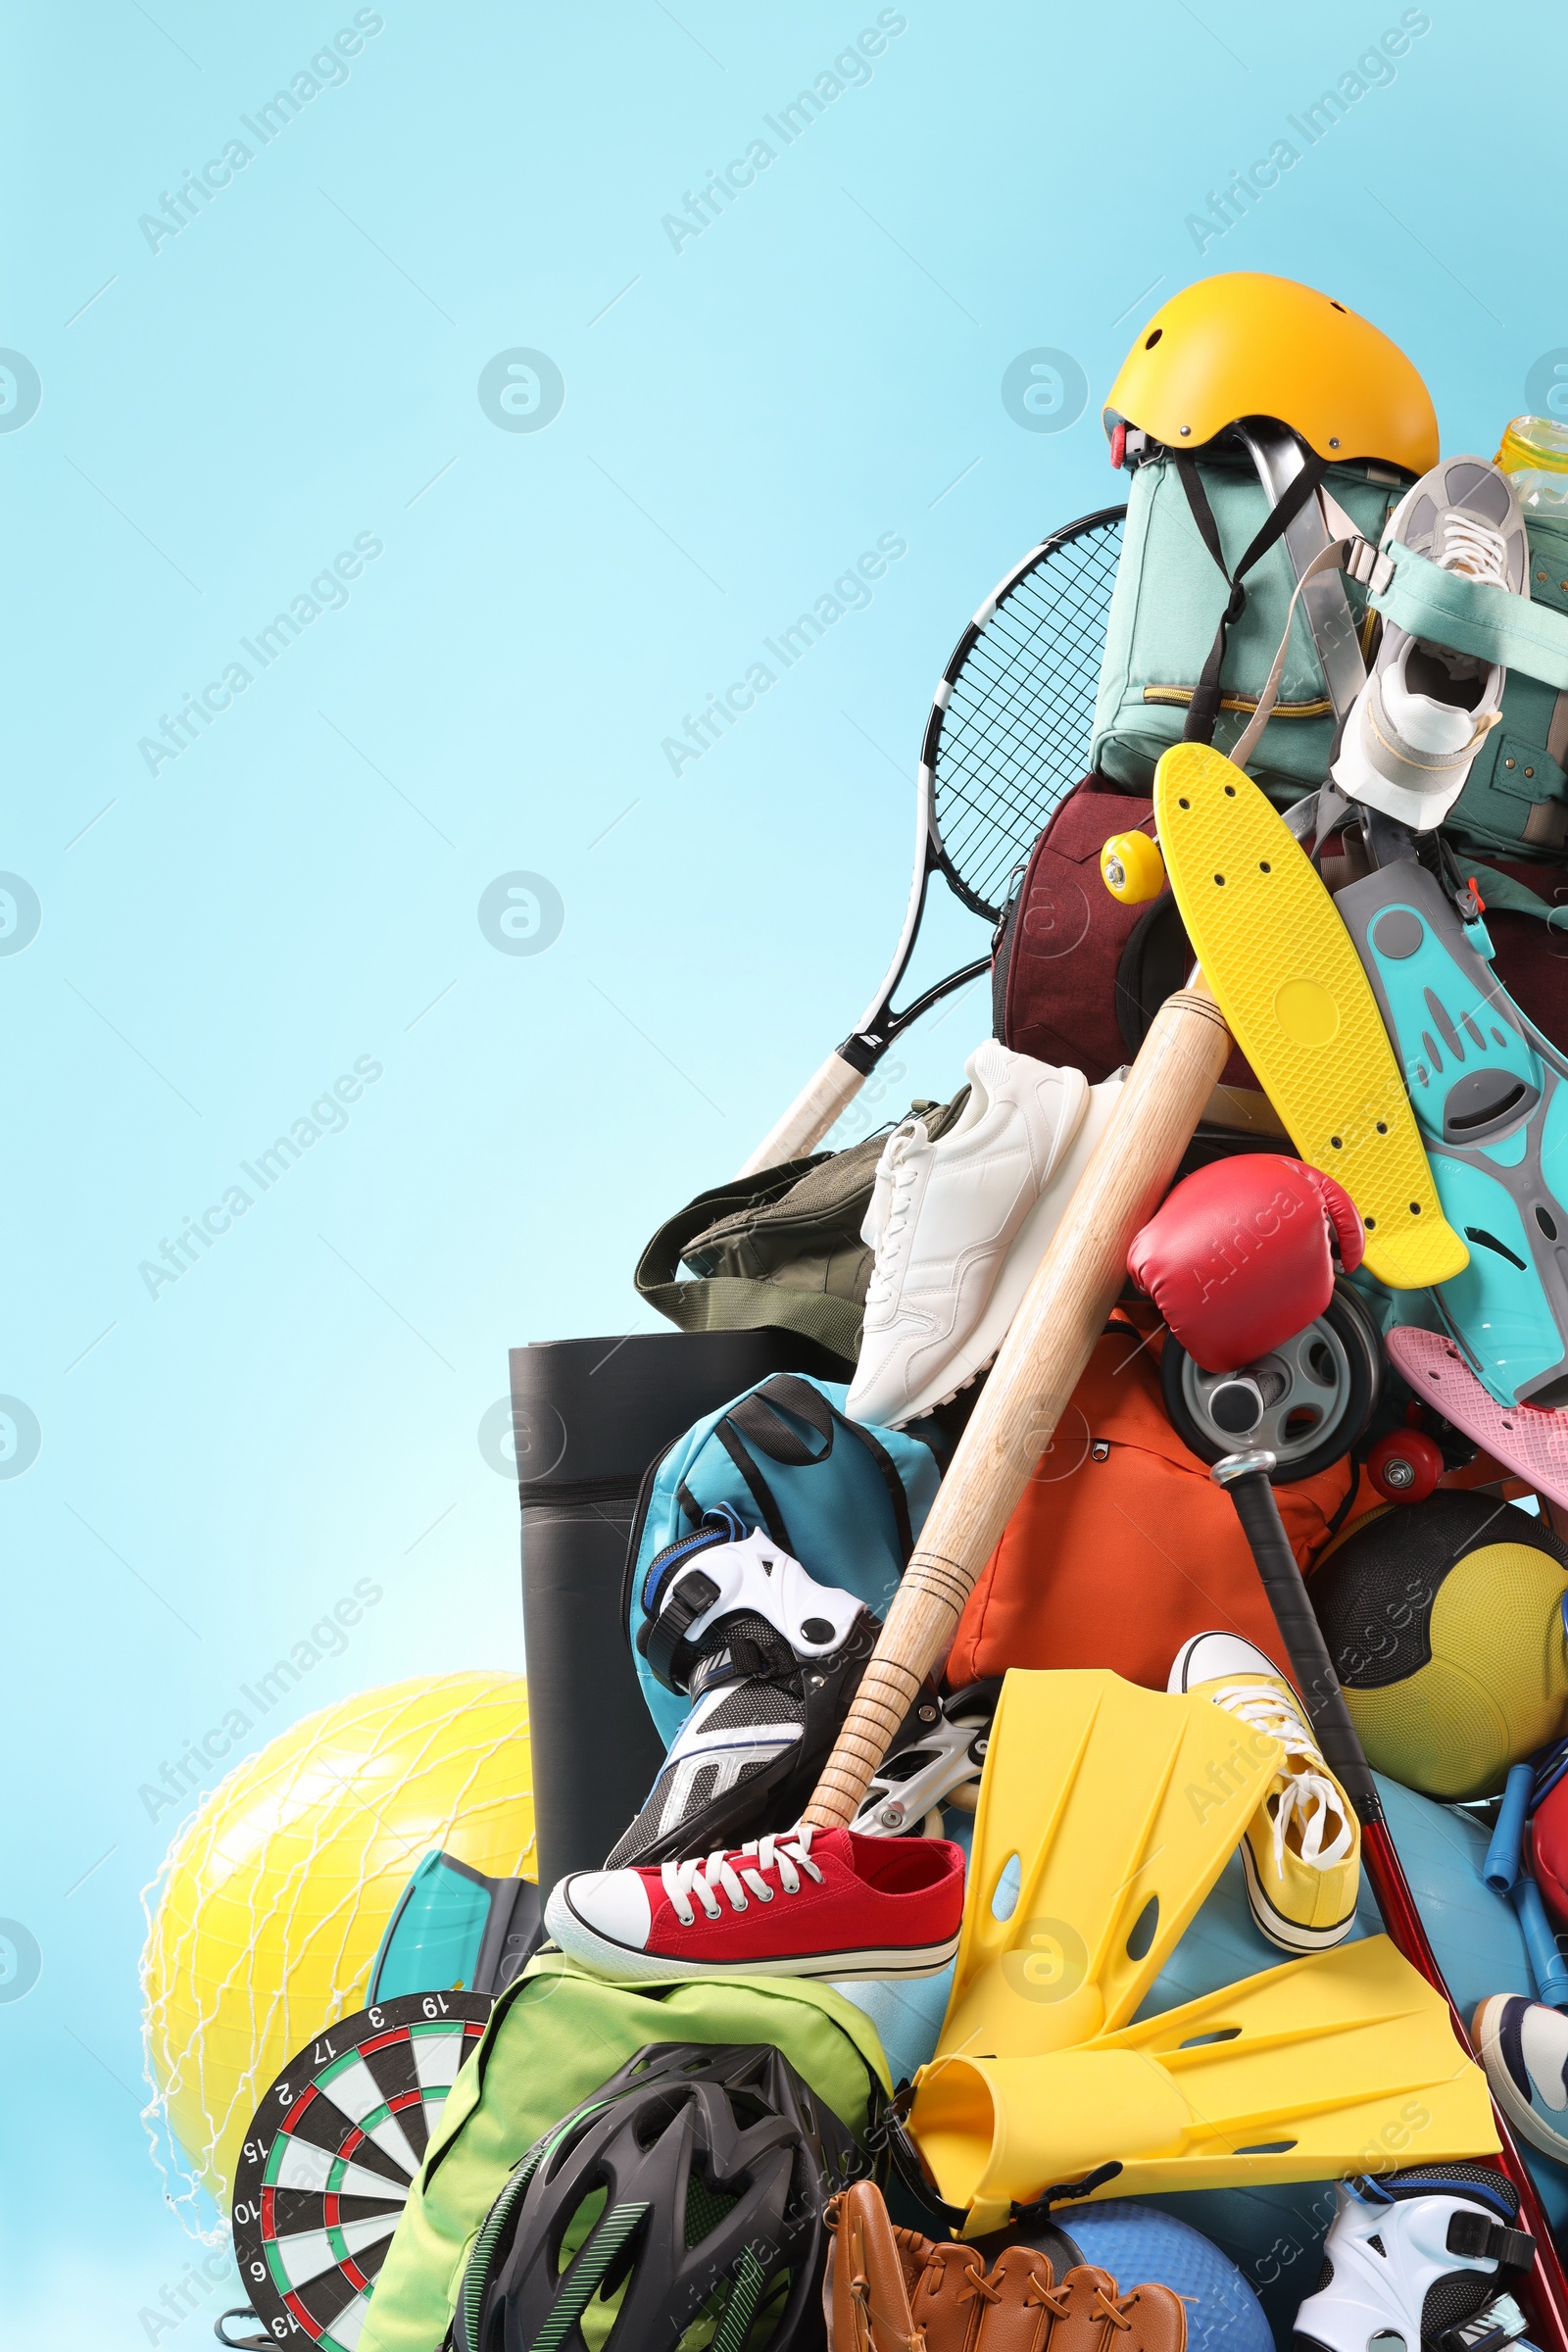 Photo of Many different sports equipment on light blue background